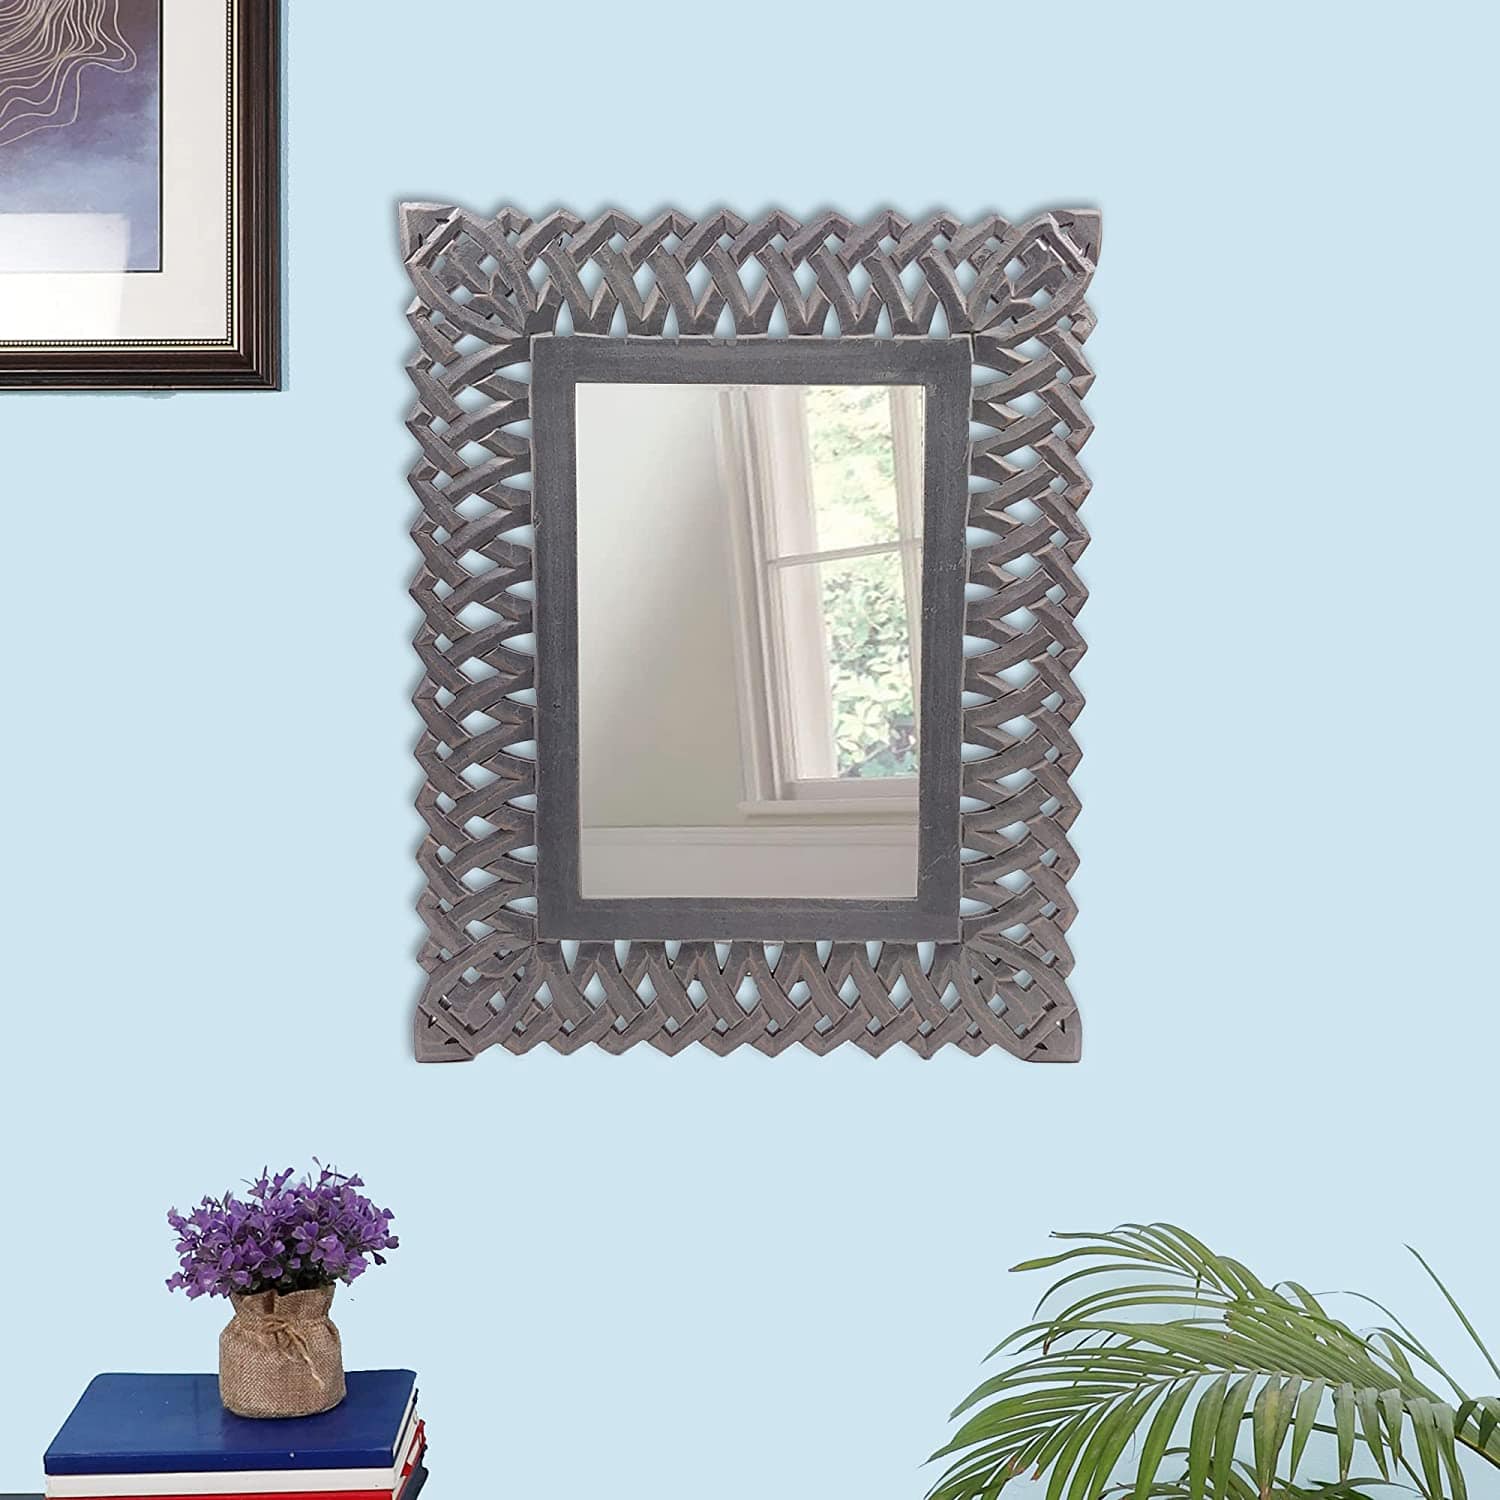 Decorative Hand Crafted Engineered Wooden Wall Mount Mirror Frame in Distressed Grey Finish - 20x16 Inch